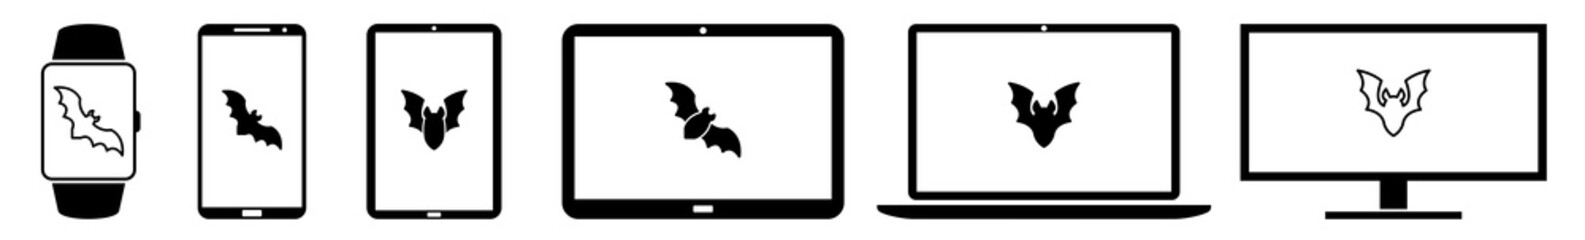 Display Bat Flying Bats Halloween Vampire Icon Devices Set | Web Screen Device Online | Laptop Vector Illustration | Mobile Phone | PC Computer Smartphone Tablet Sign Isolated